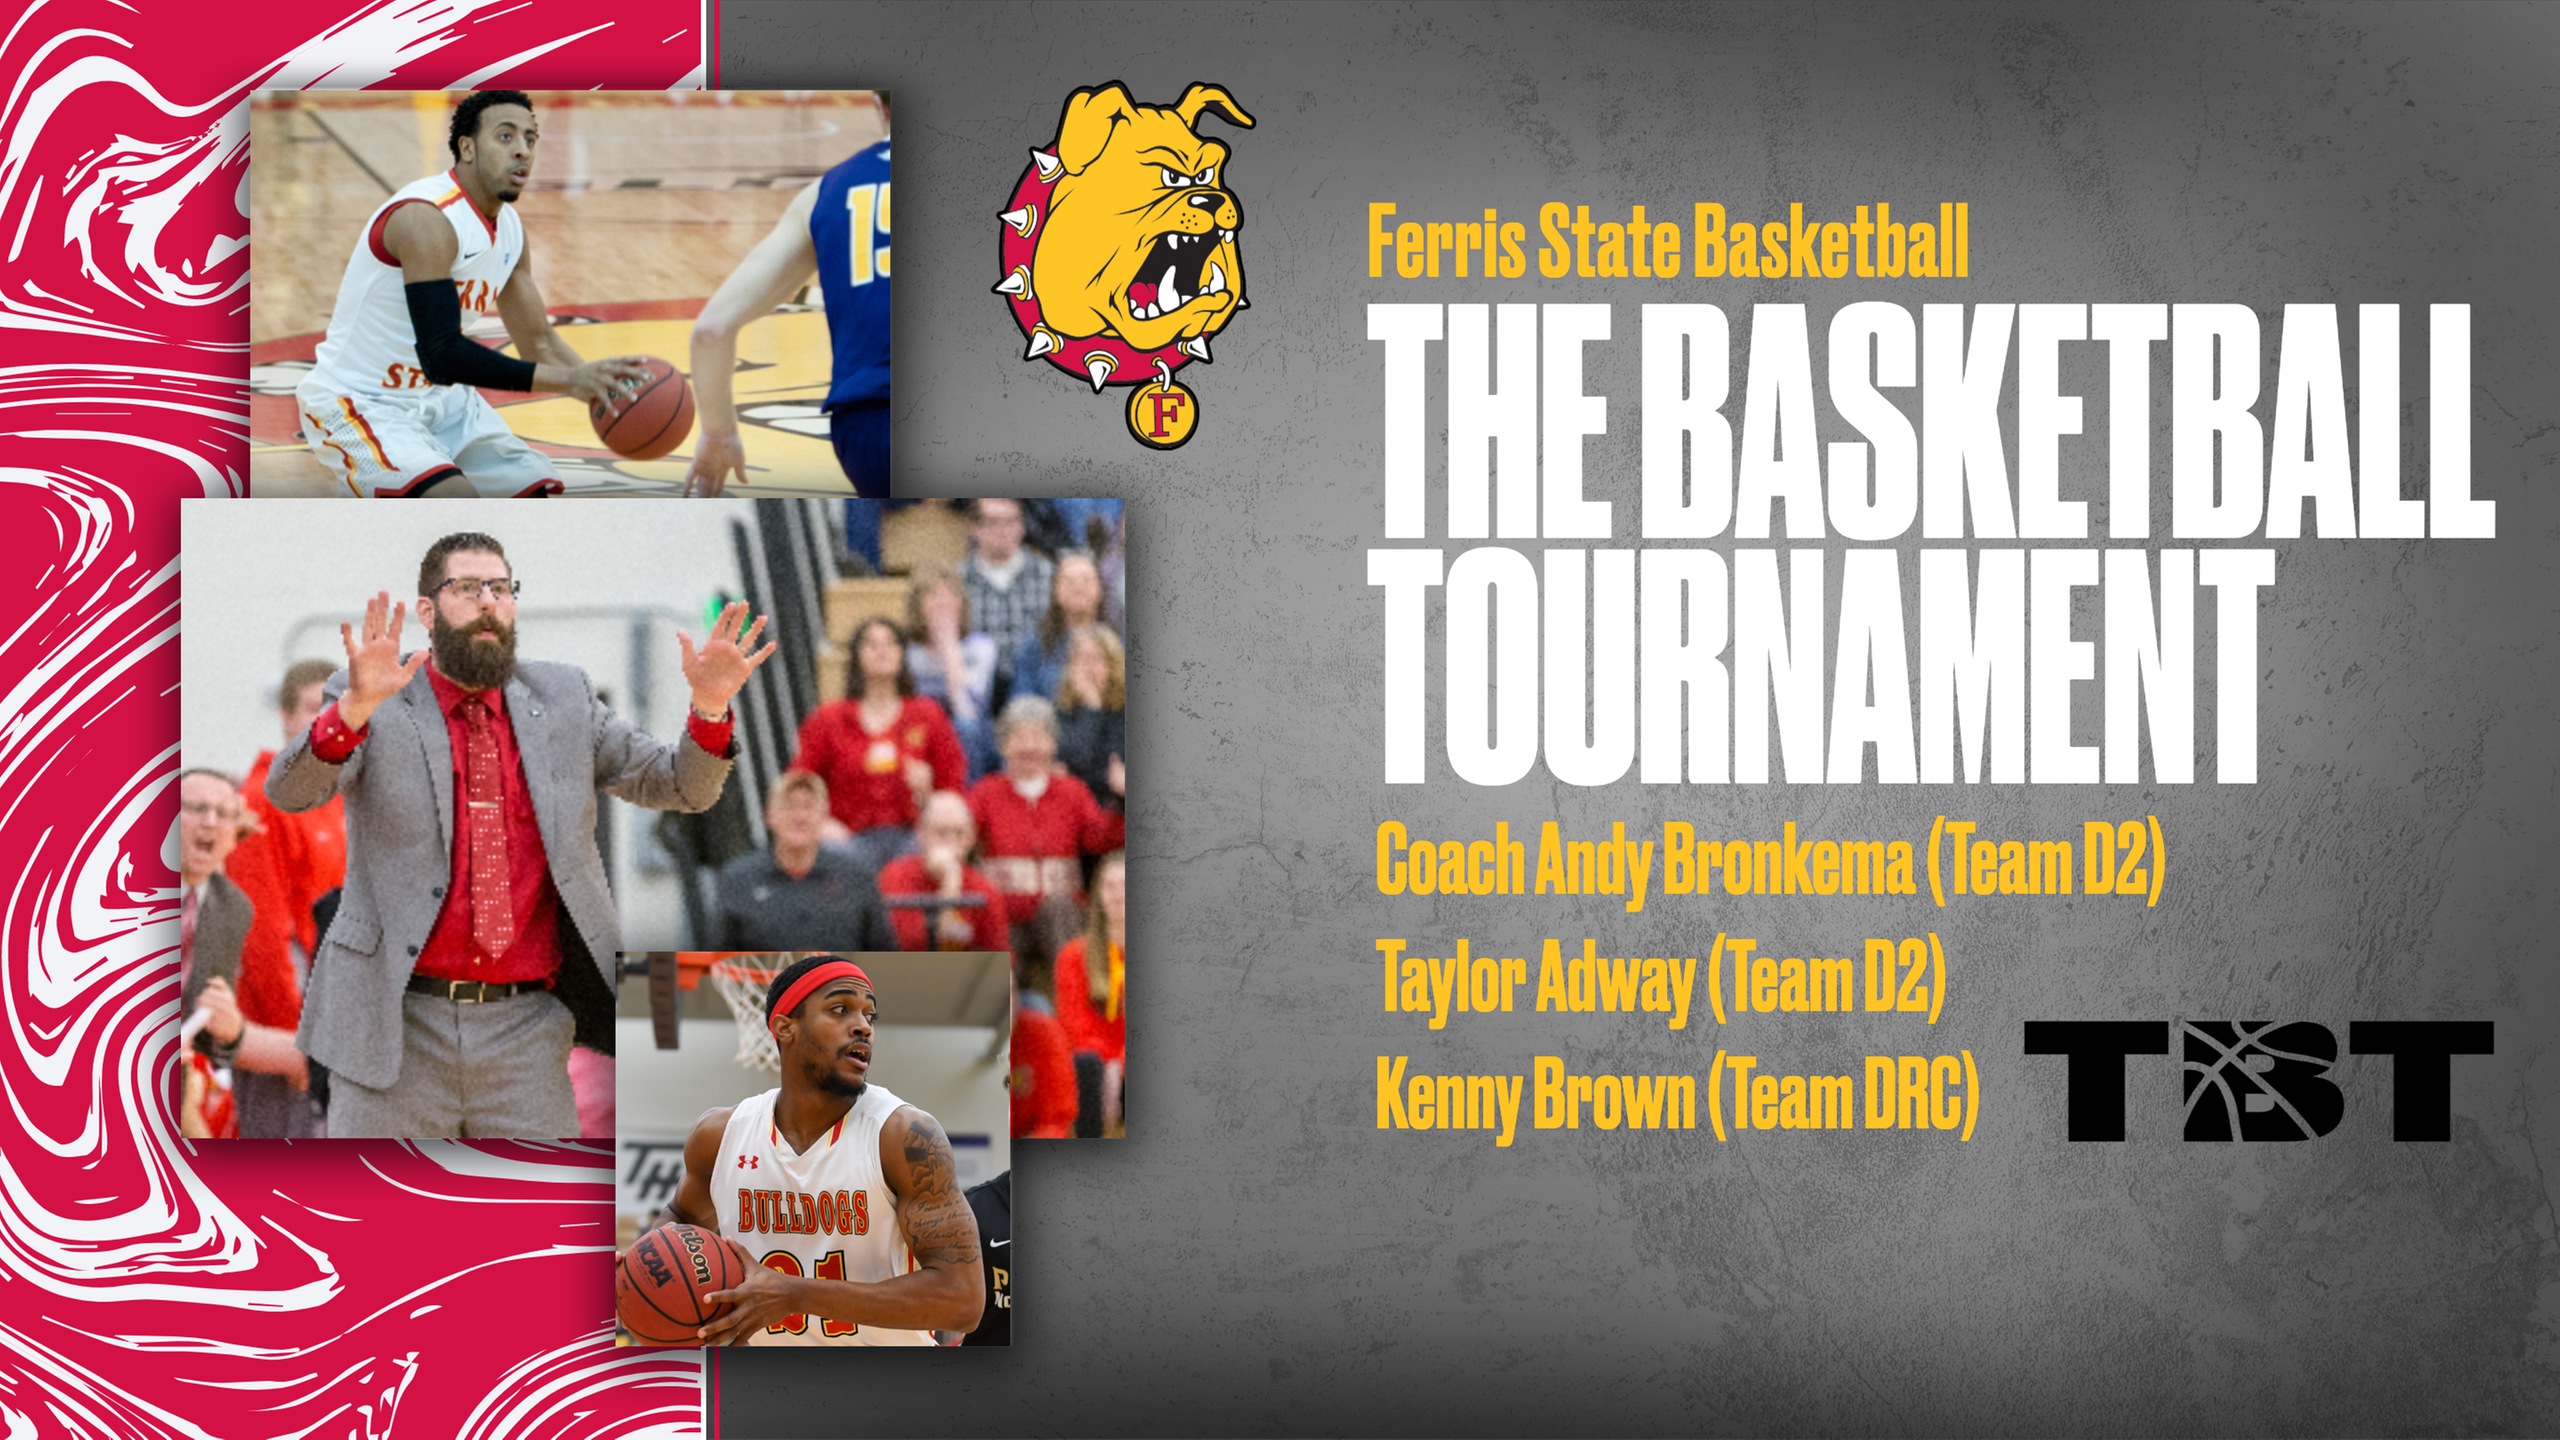 Ferris State Hoops To Be Featured Nationally In The Basketball Tournament On ESPN Networks This Weekend